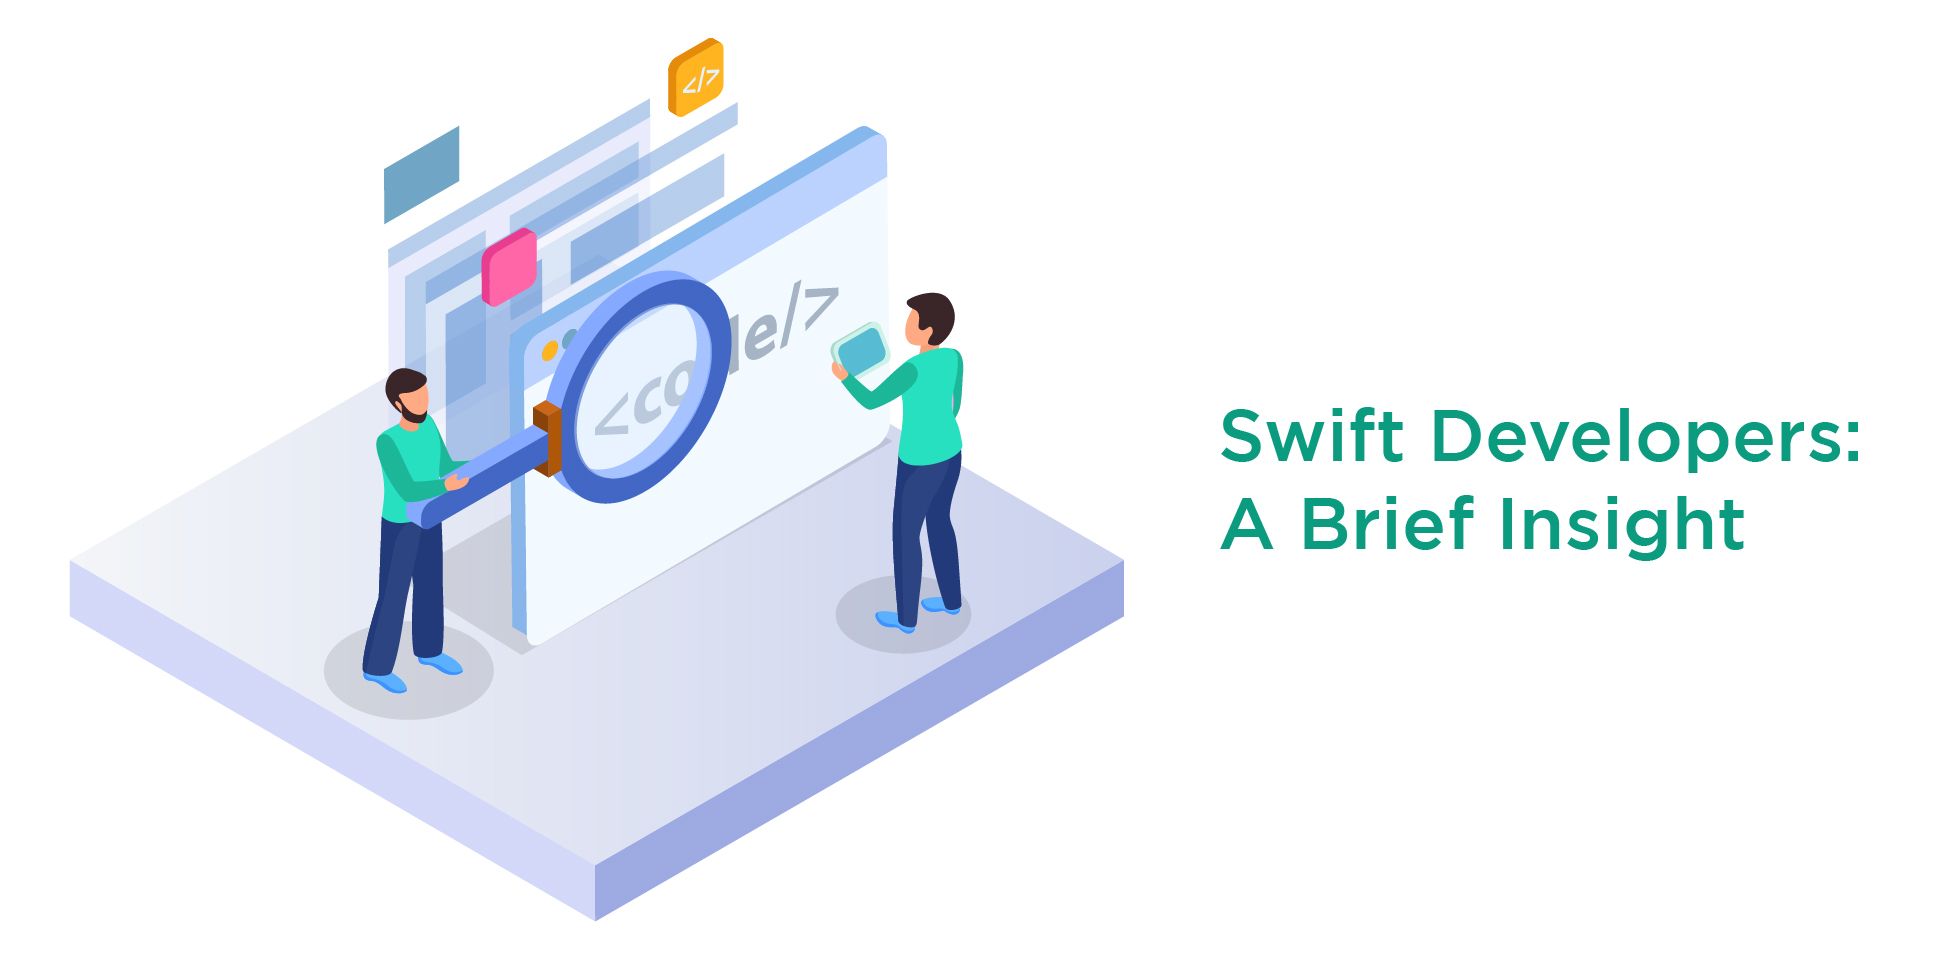 Swift Developers: A Brief Insight